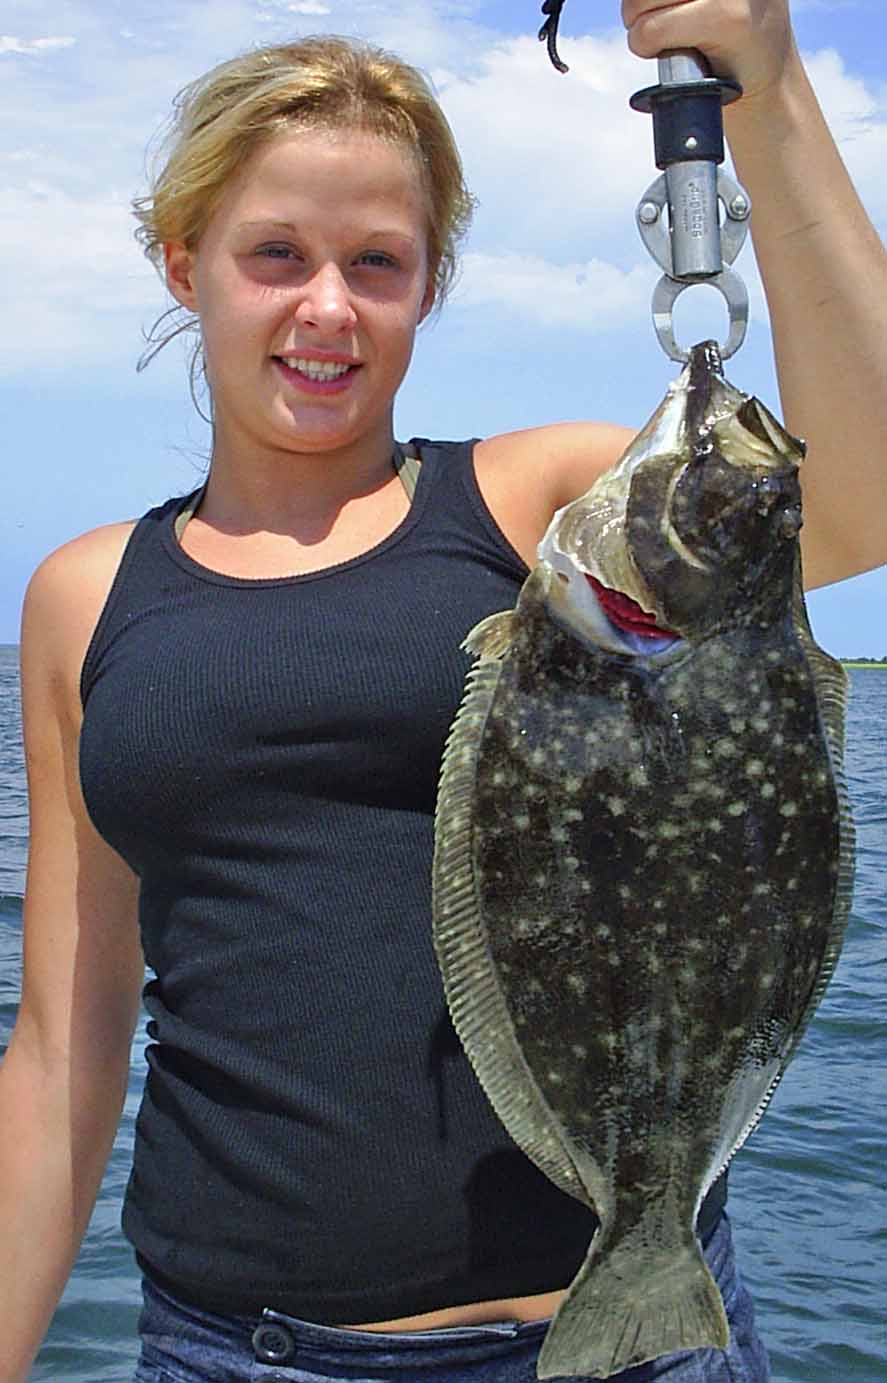 Let's go fishing for flounder, bluefish, striped bass, weakies, etc!